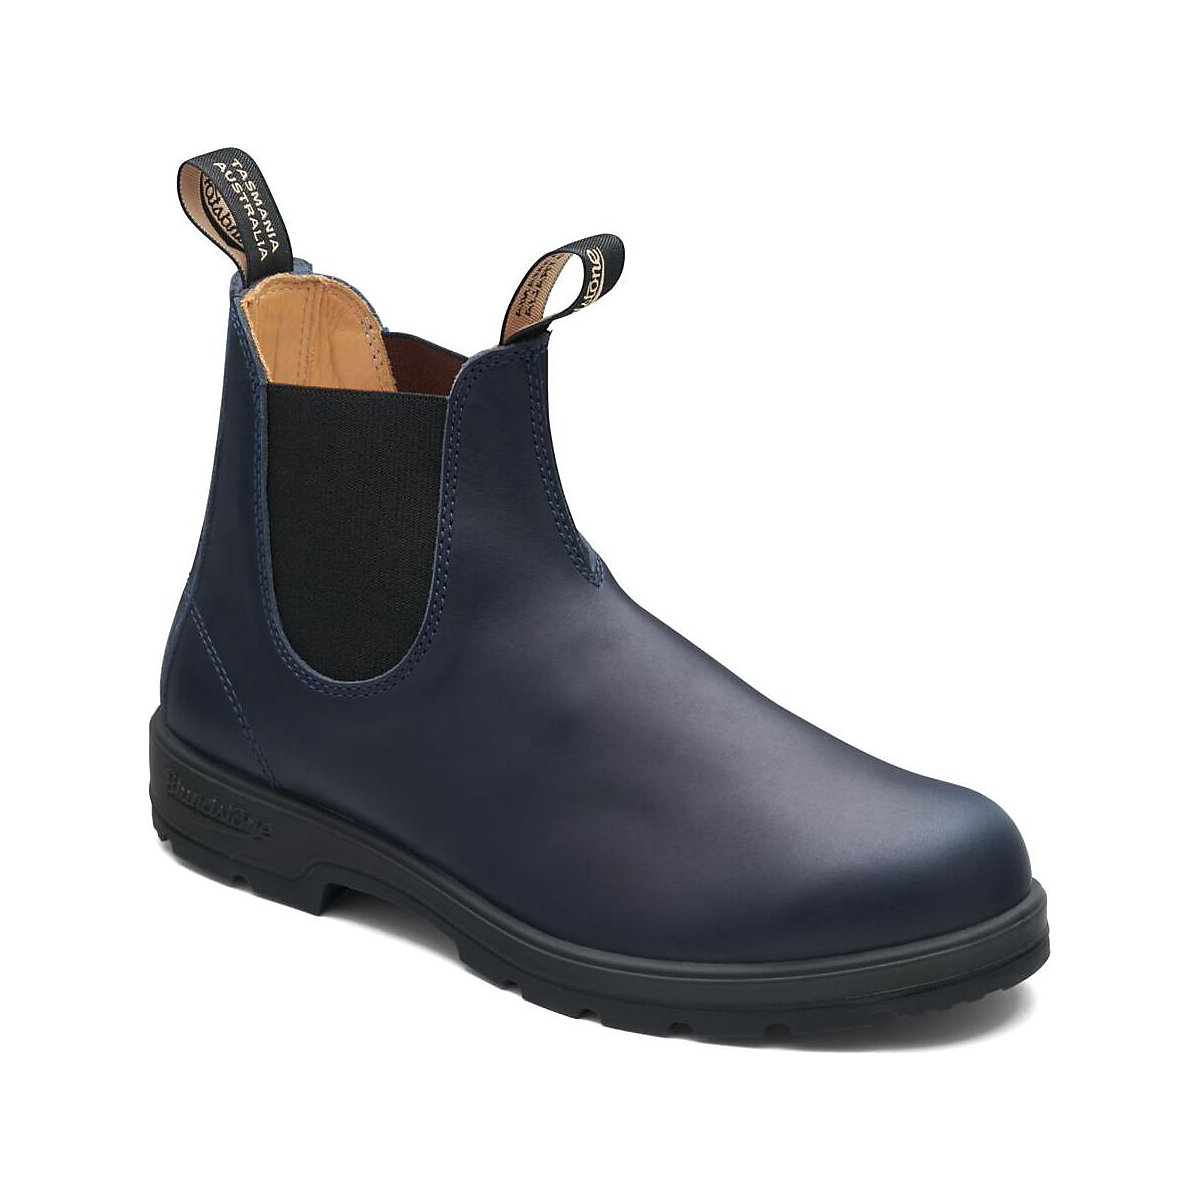 Blundstone 2246 Navy Leather (550 Series) Chelsea Boots dunkelblau